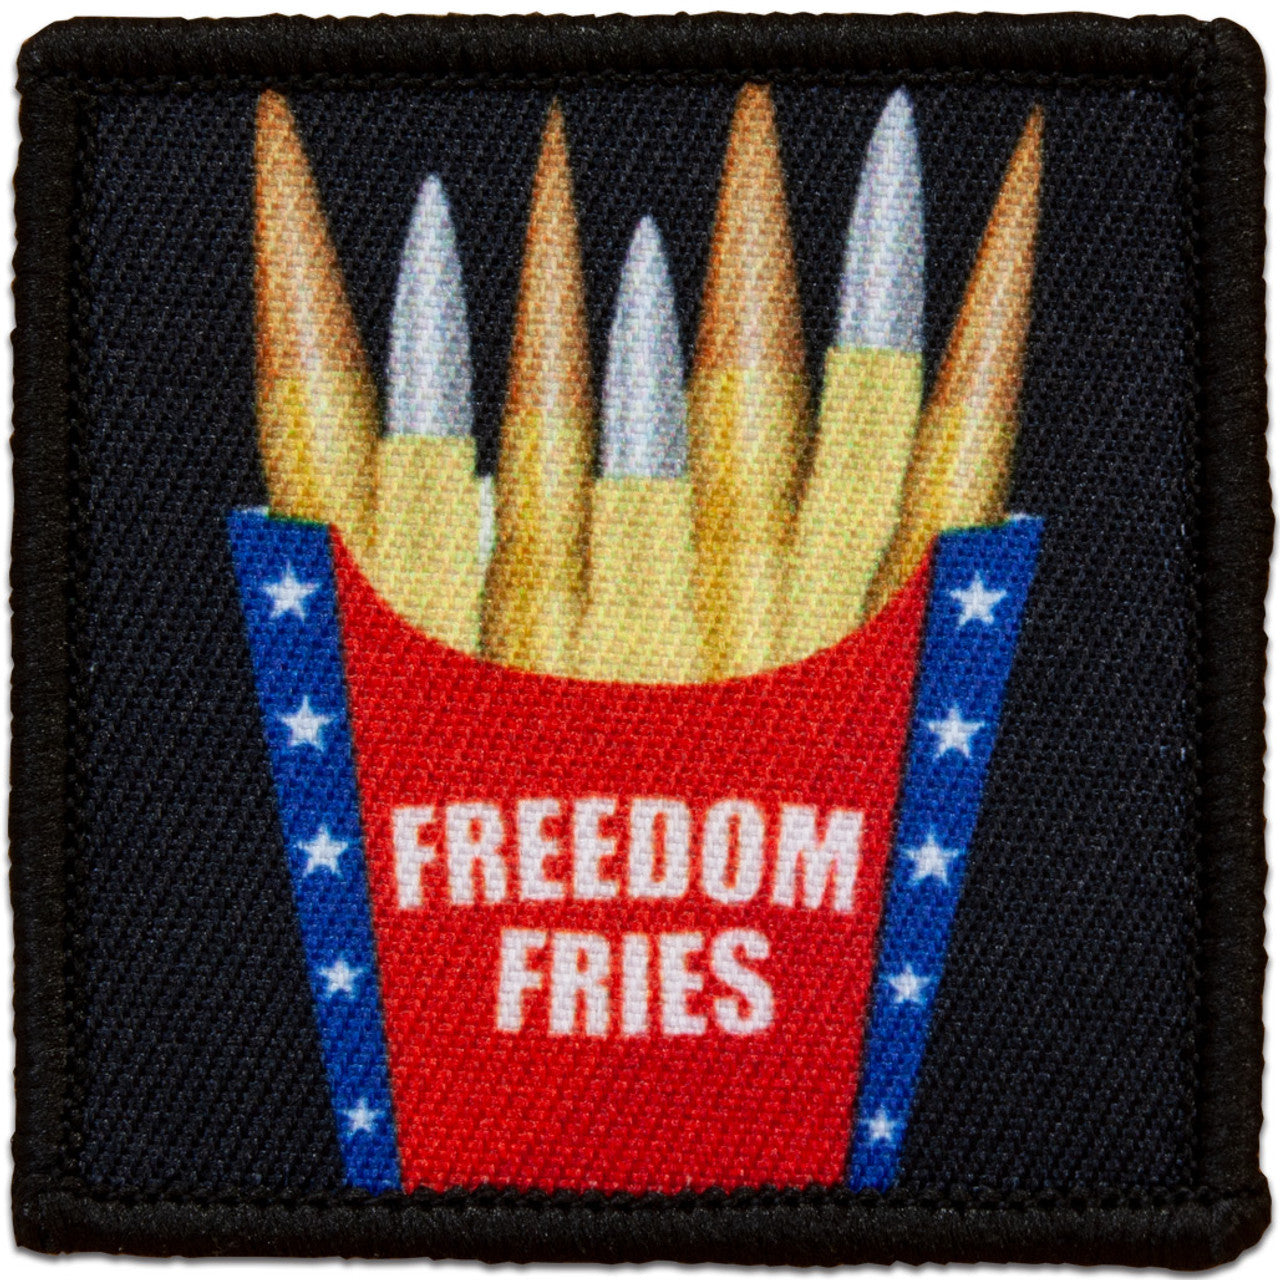 "FREEDOM FRIES" MORALE PATCH